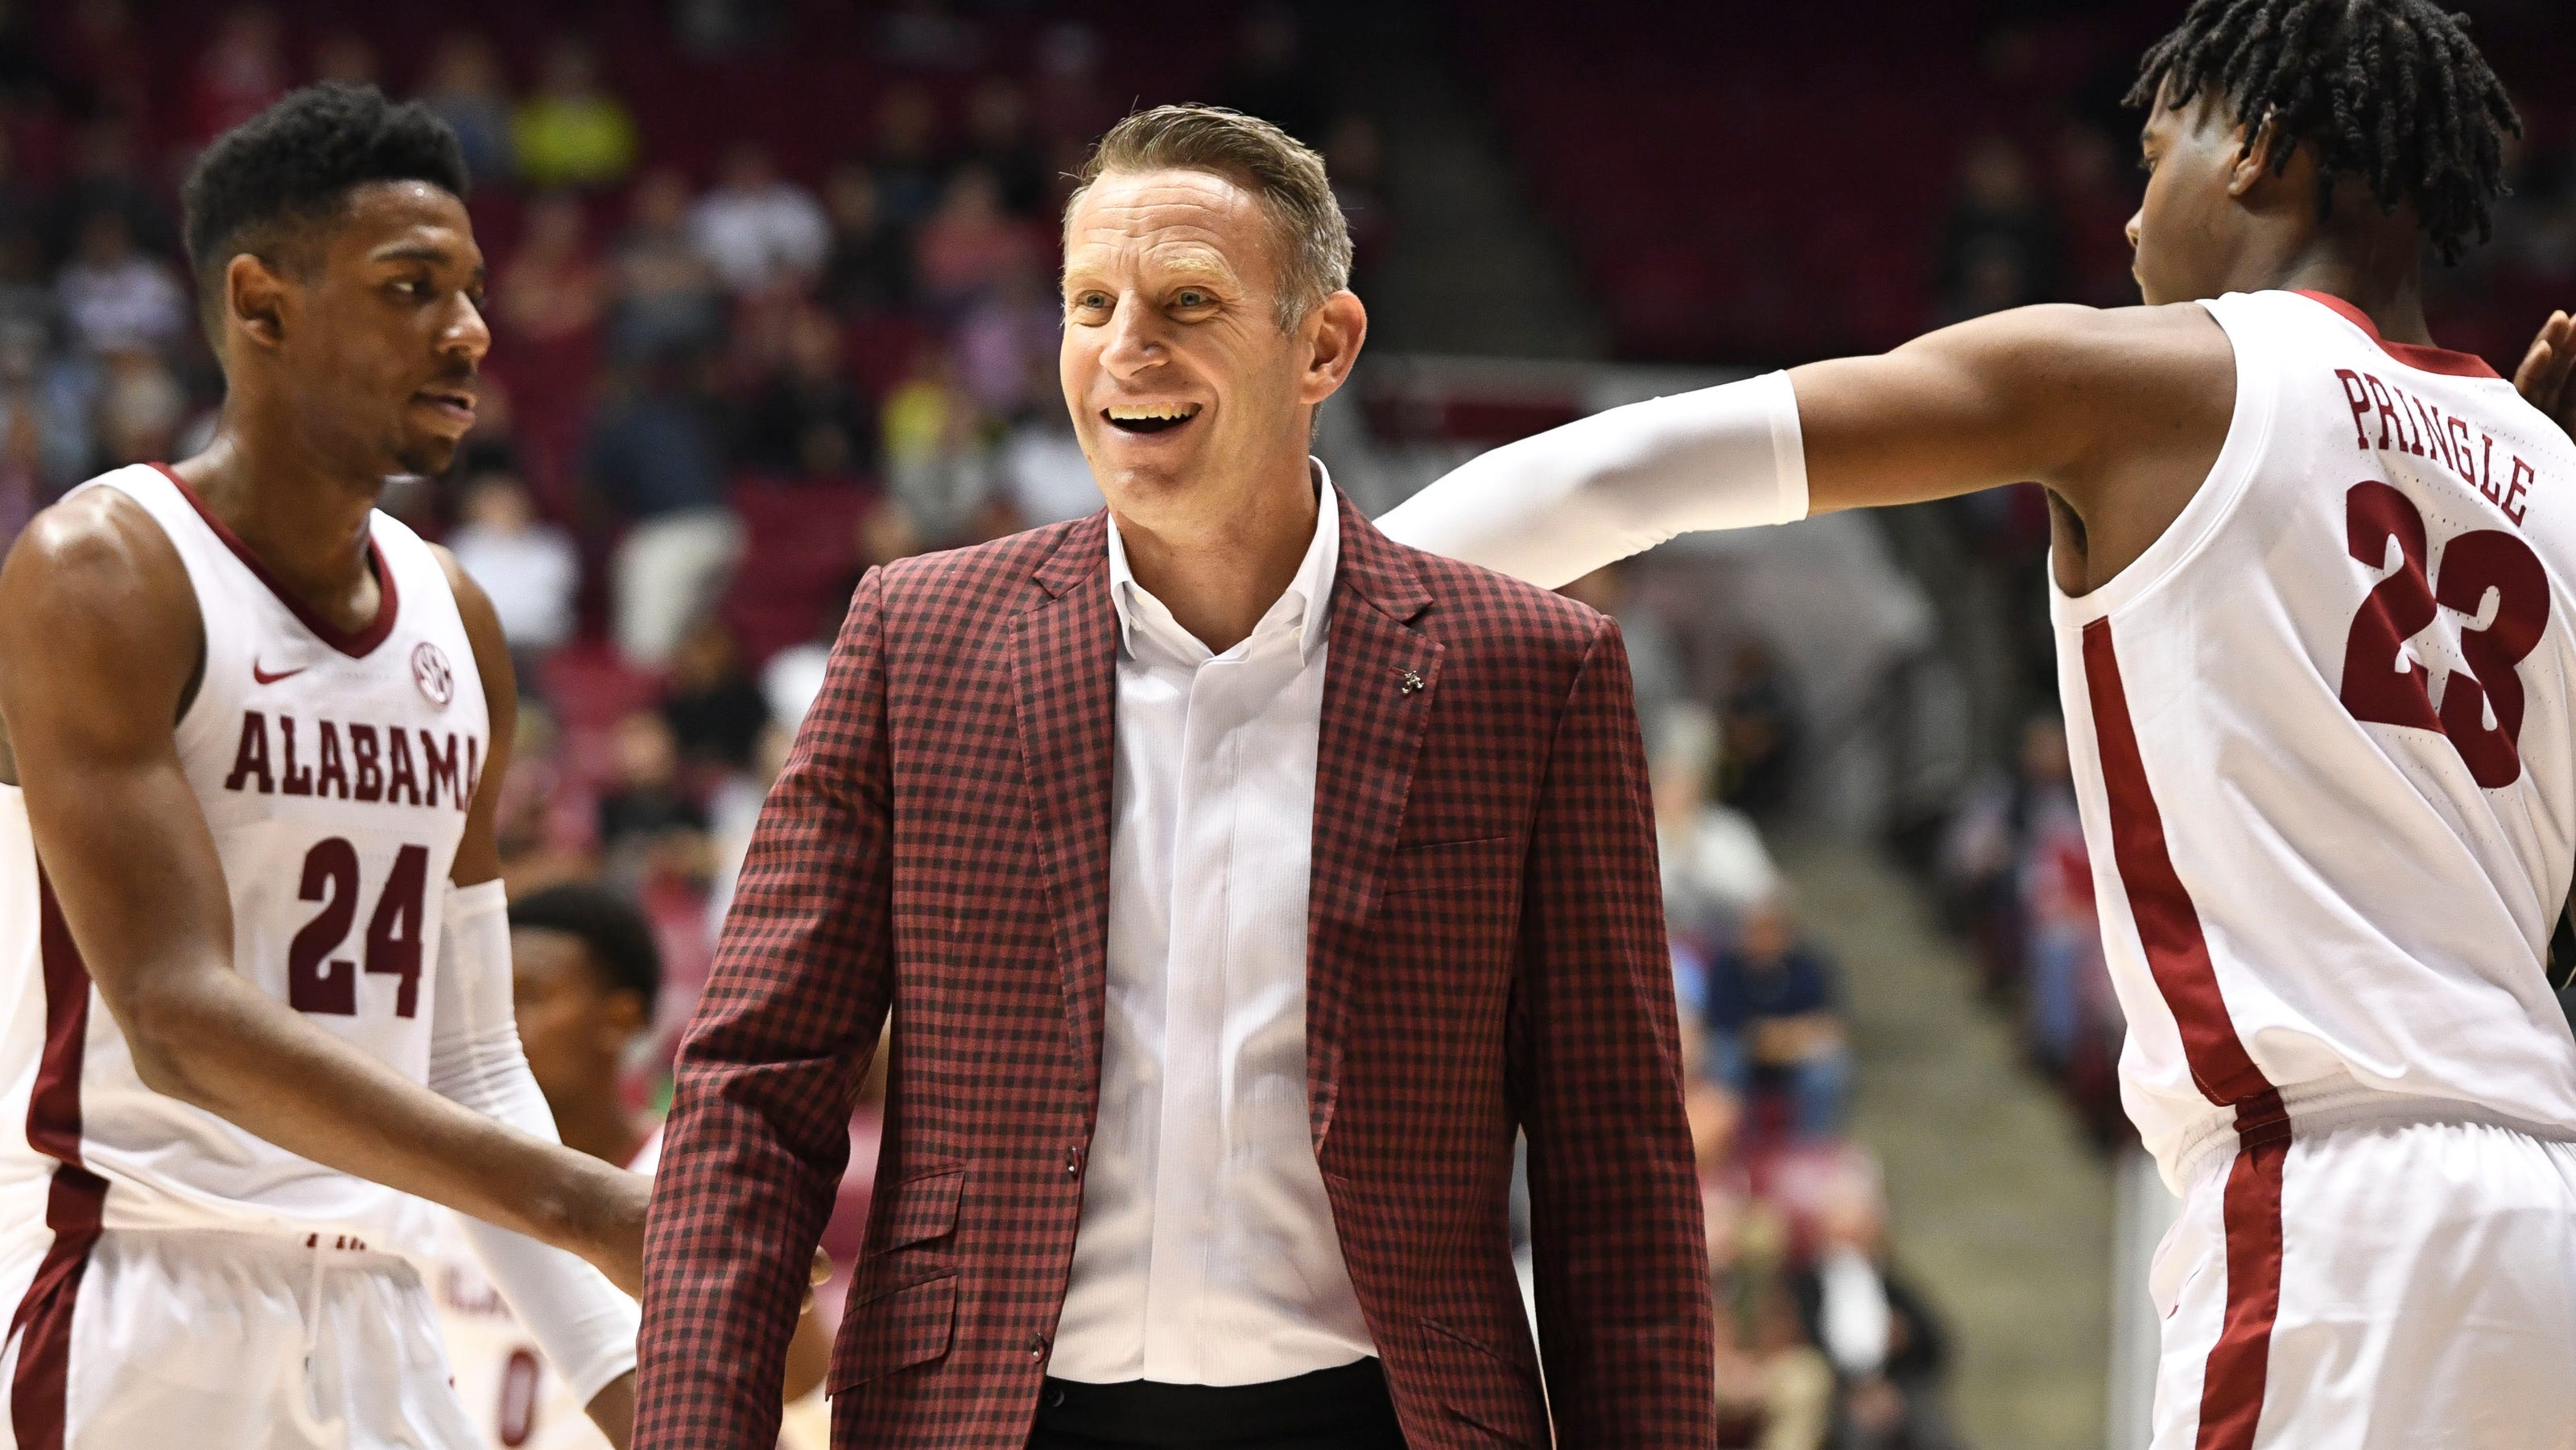 Watch: Alabama basketball coach Nate Oats discusses his contract extension